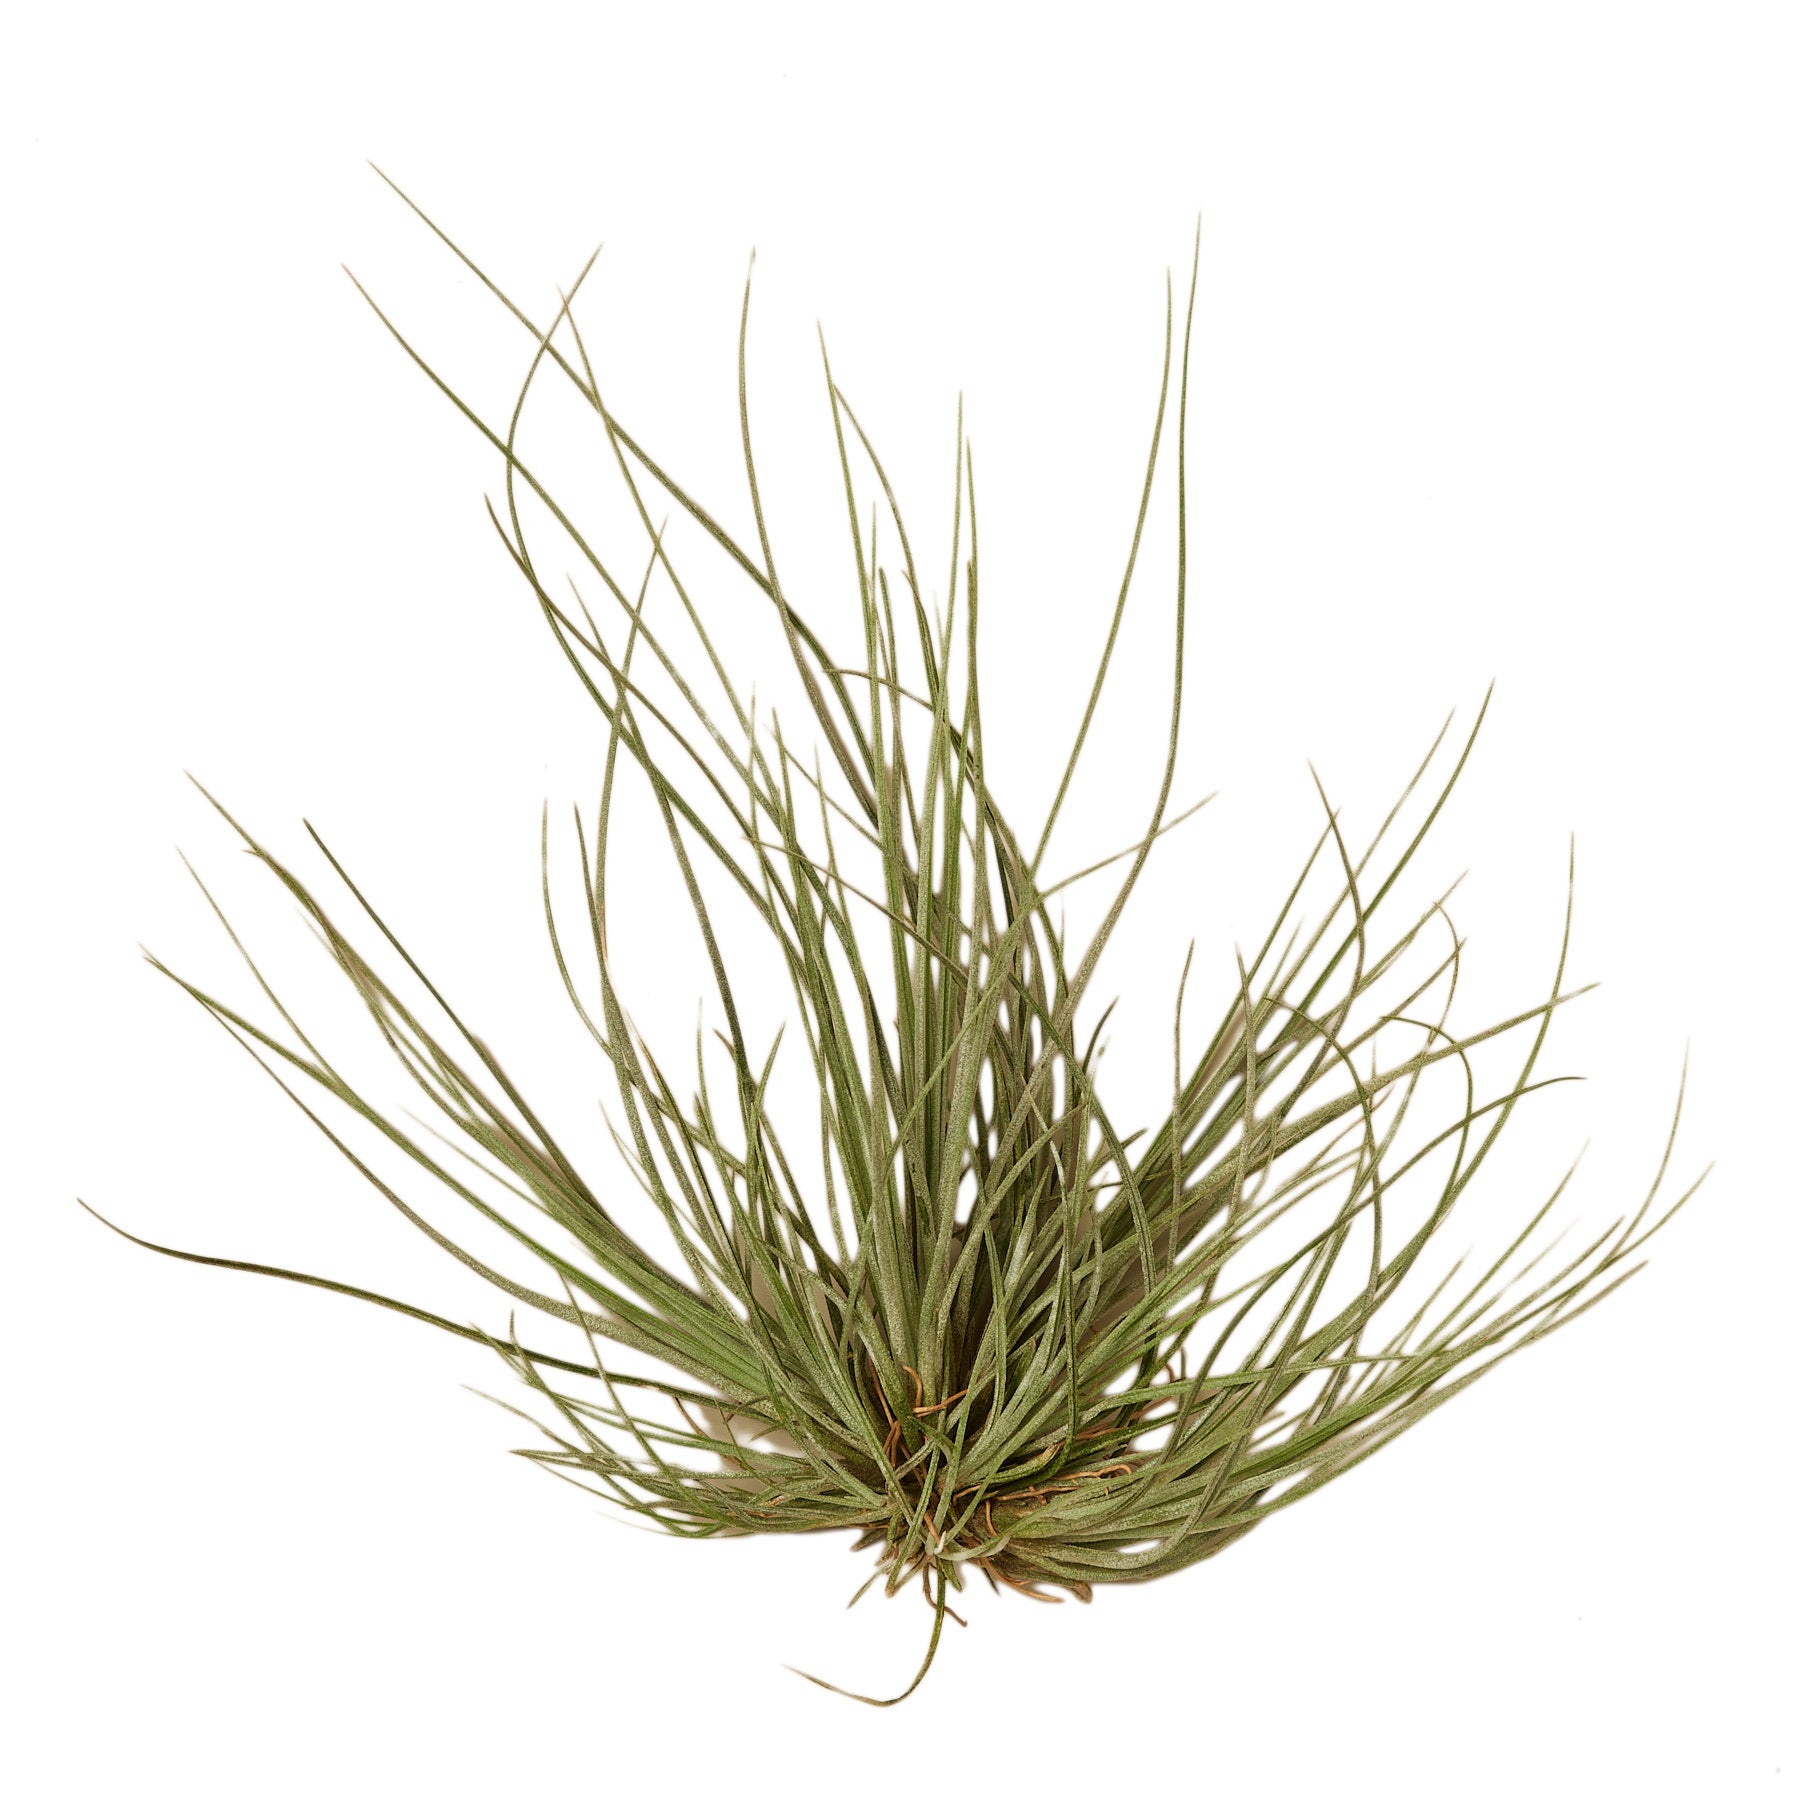 A small air plant on a white background, sourced from the best garden center near me.